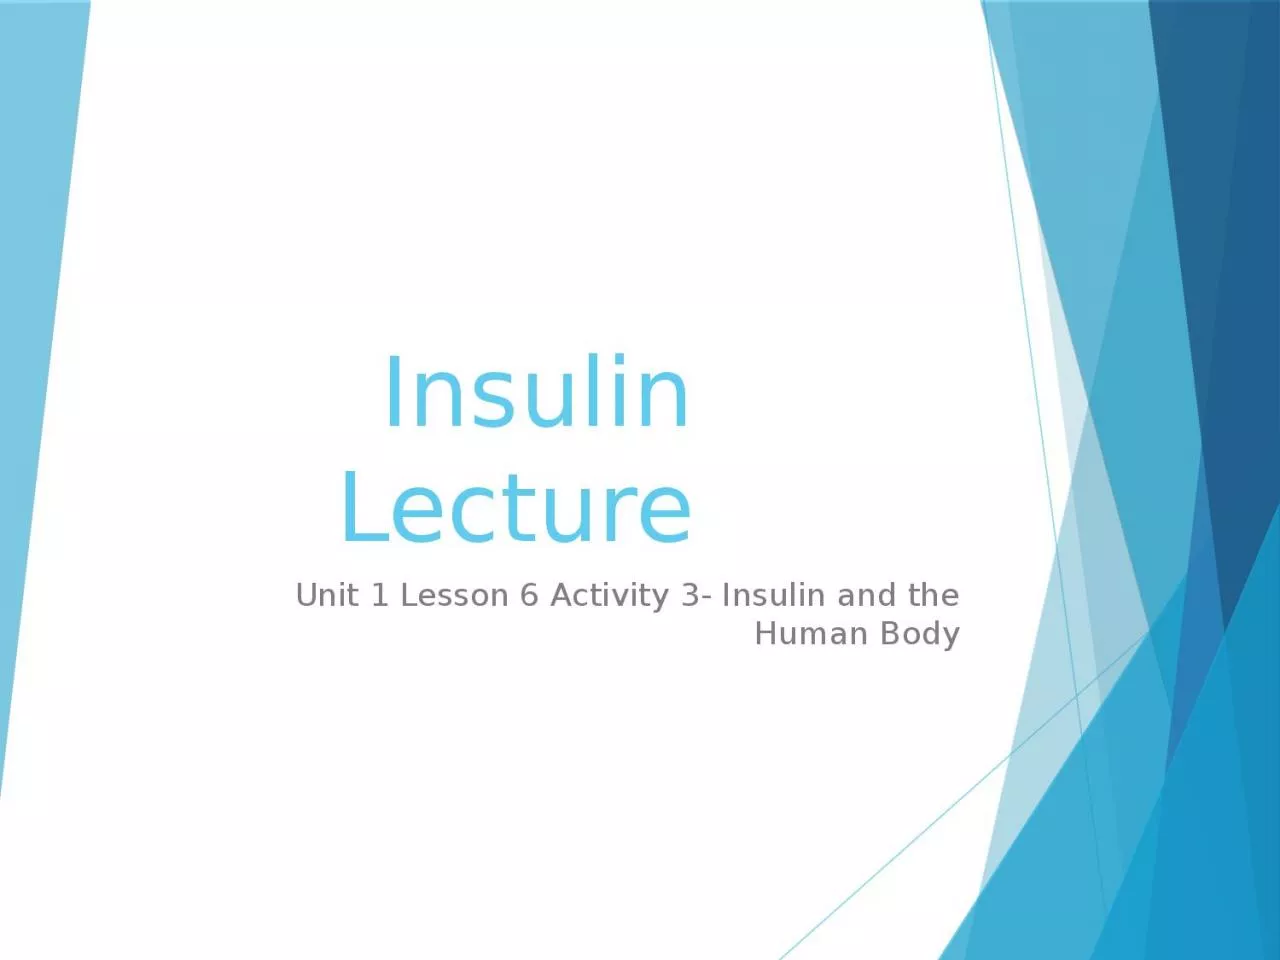 Insulin Lecture Unit 1 Lesson 6 Activity 3- Insulin and the Human Body